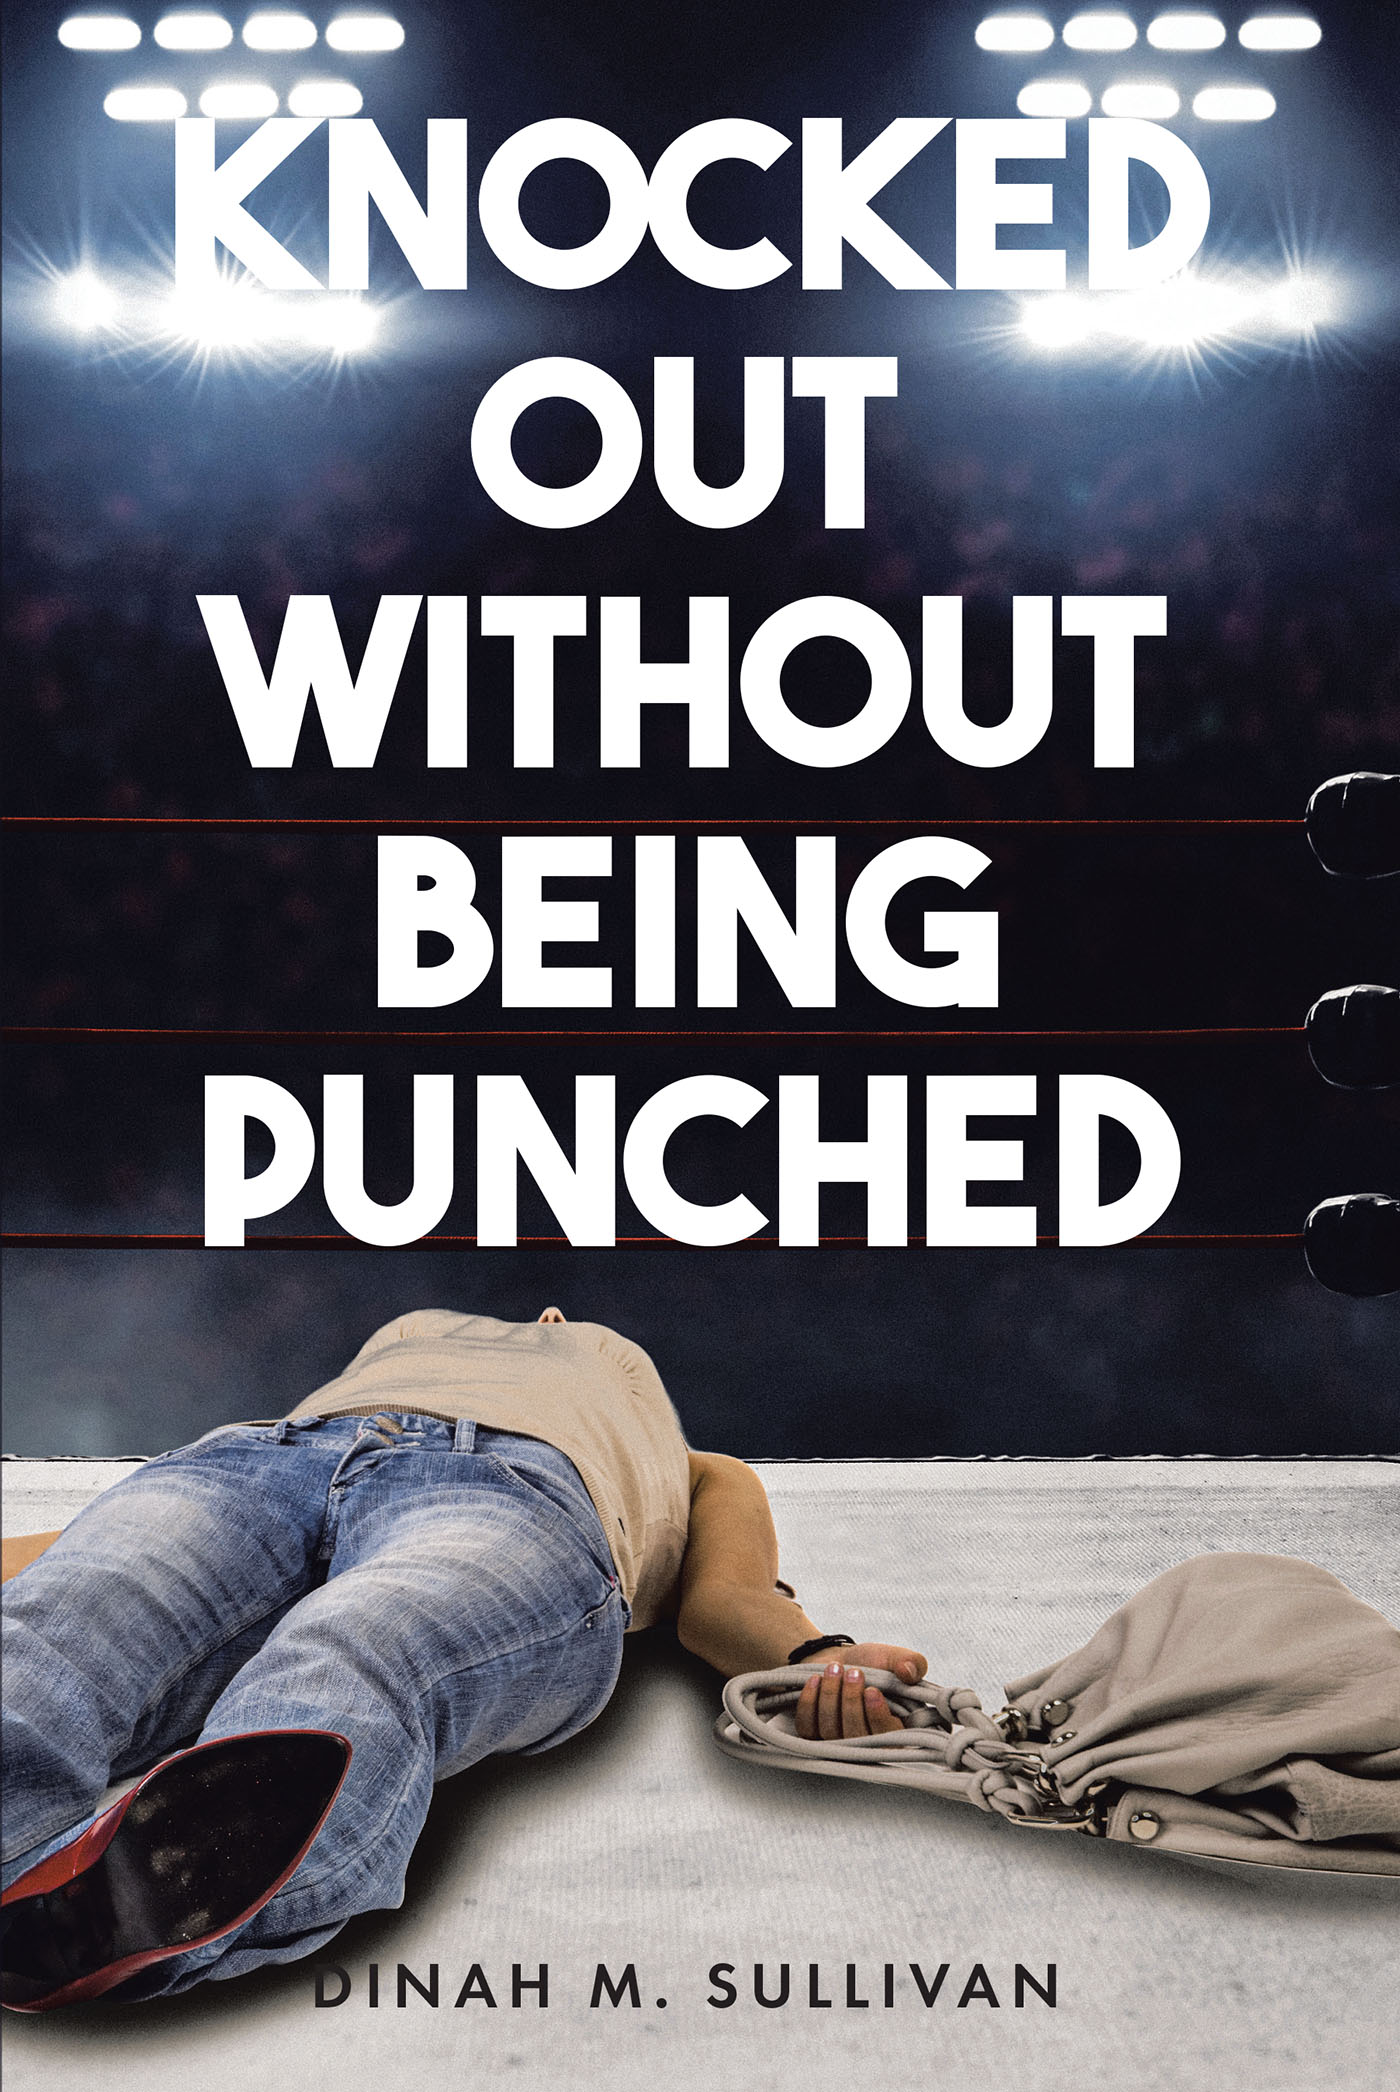 Dinah M. Sullivan’s Newly Released "Knocked Out without Being Punched" is an Emotionally Charged Look at a Mother’s Journey